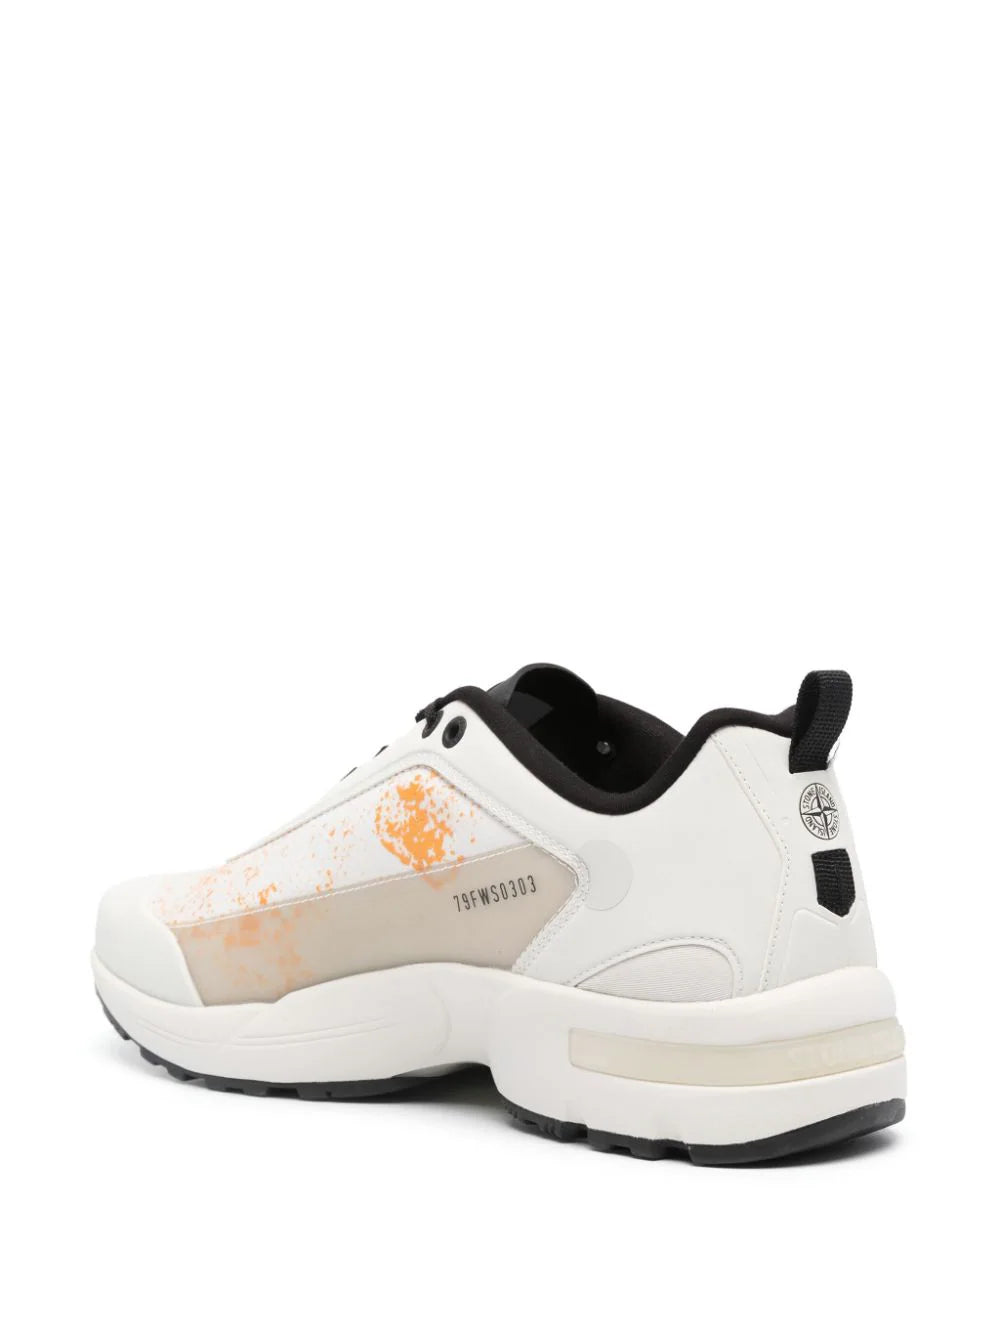 Stone Island Grime Rubber-Trimmed Leather and Ripstop Trainers in White